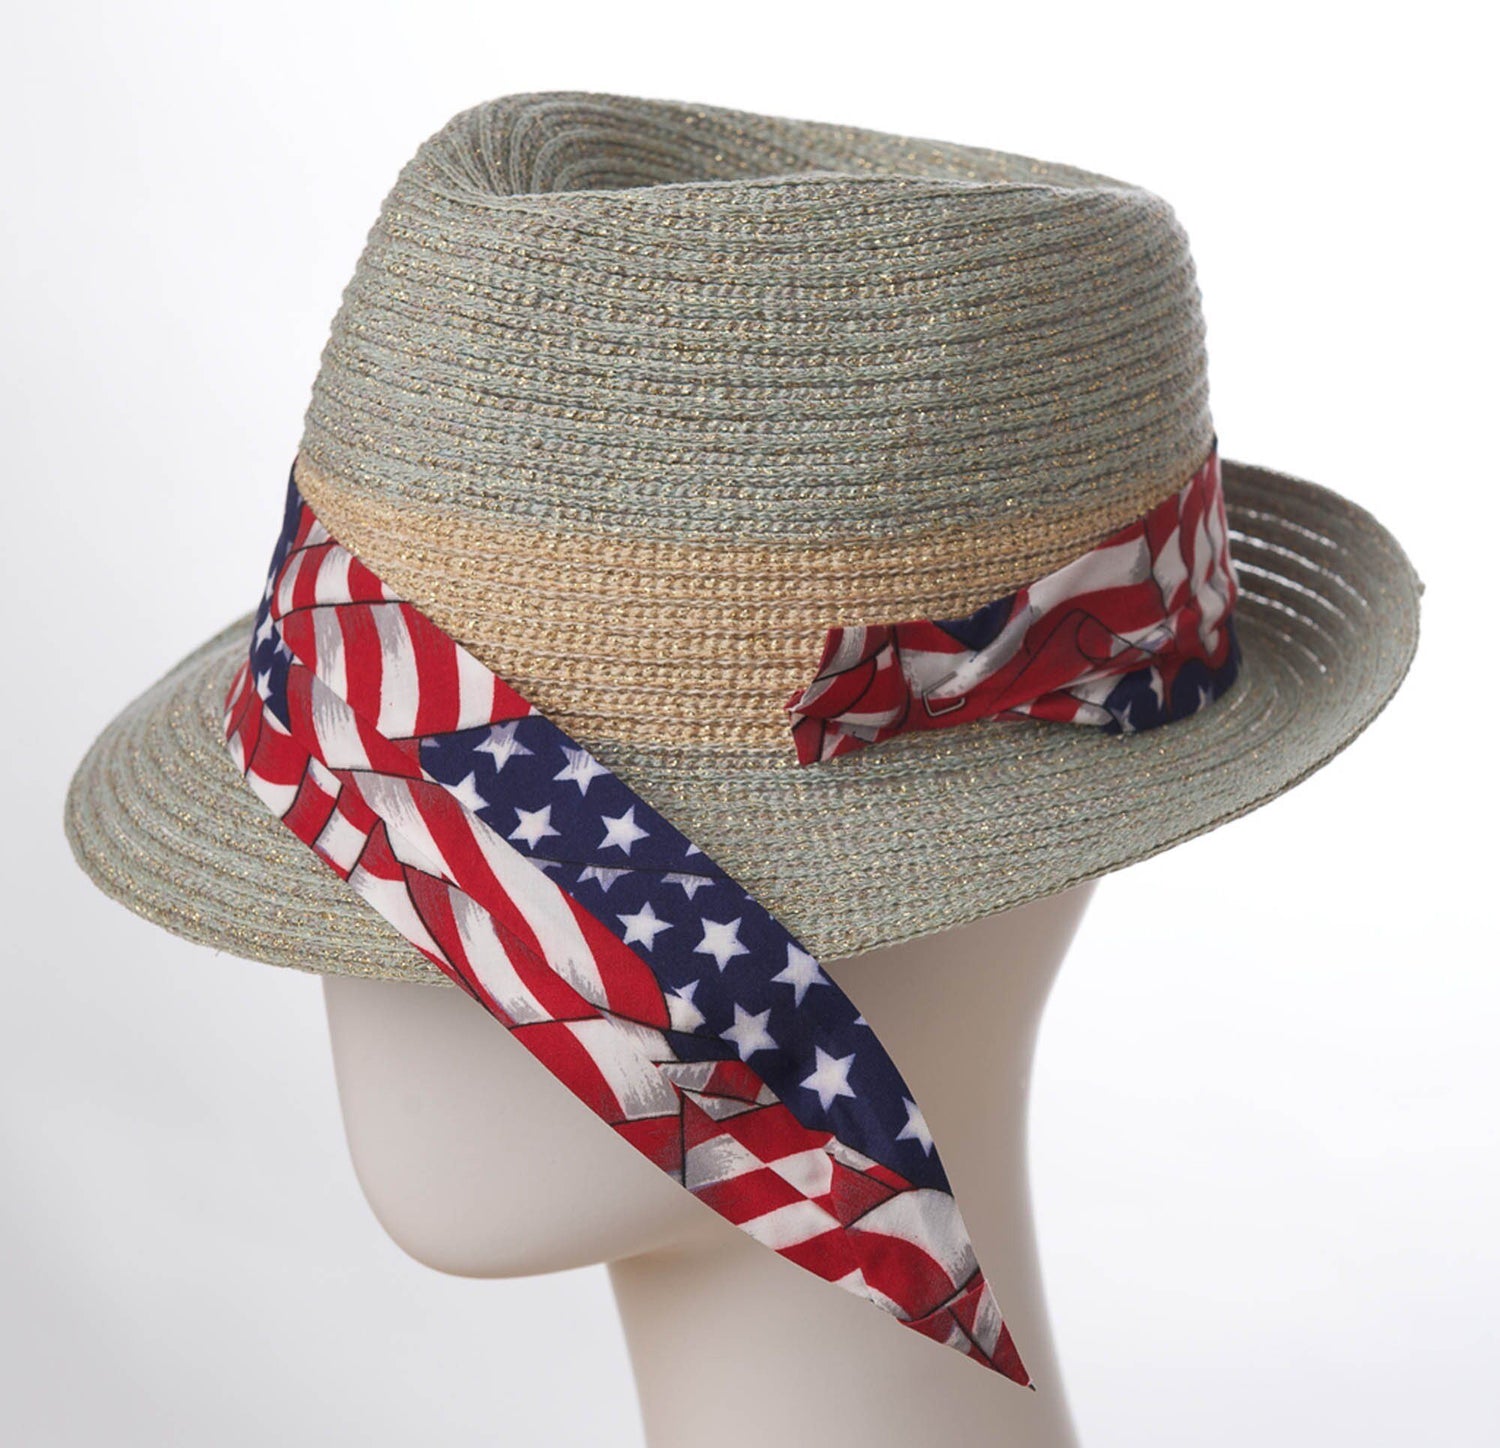 C Hat Bands - American Flag 3-Pleat Poly/Cotton Hat Band with 2-End Ho ...